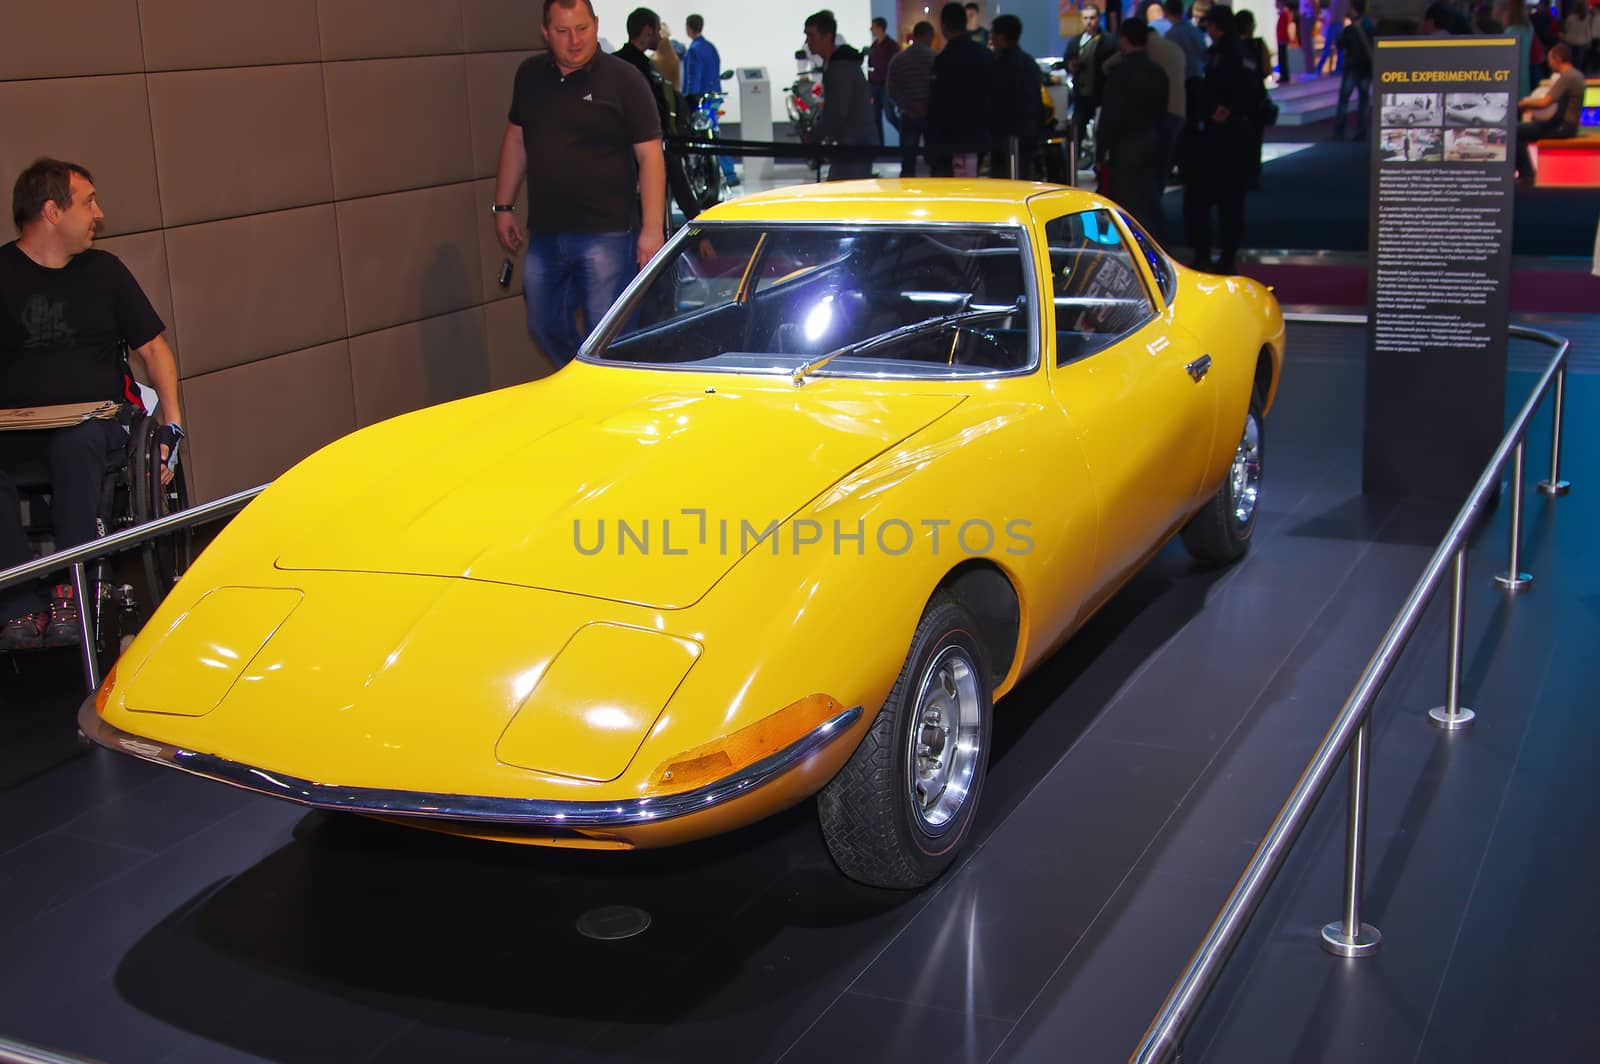 Opel Experimental GT by eans